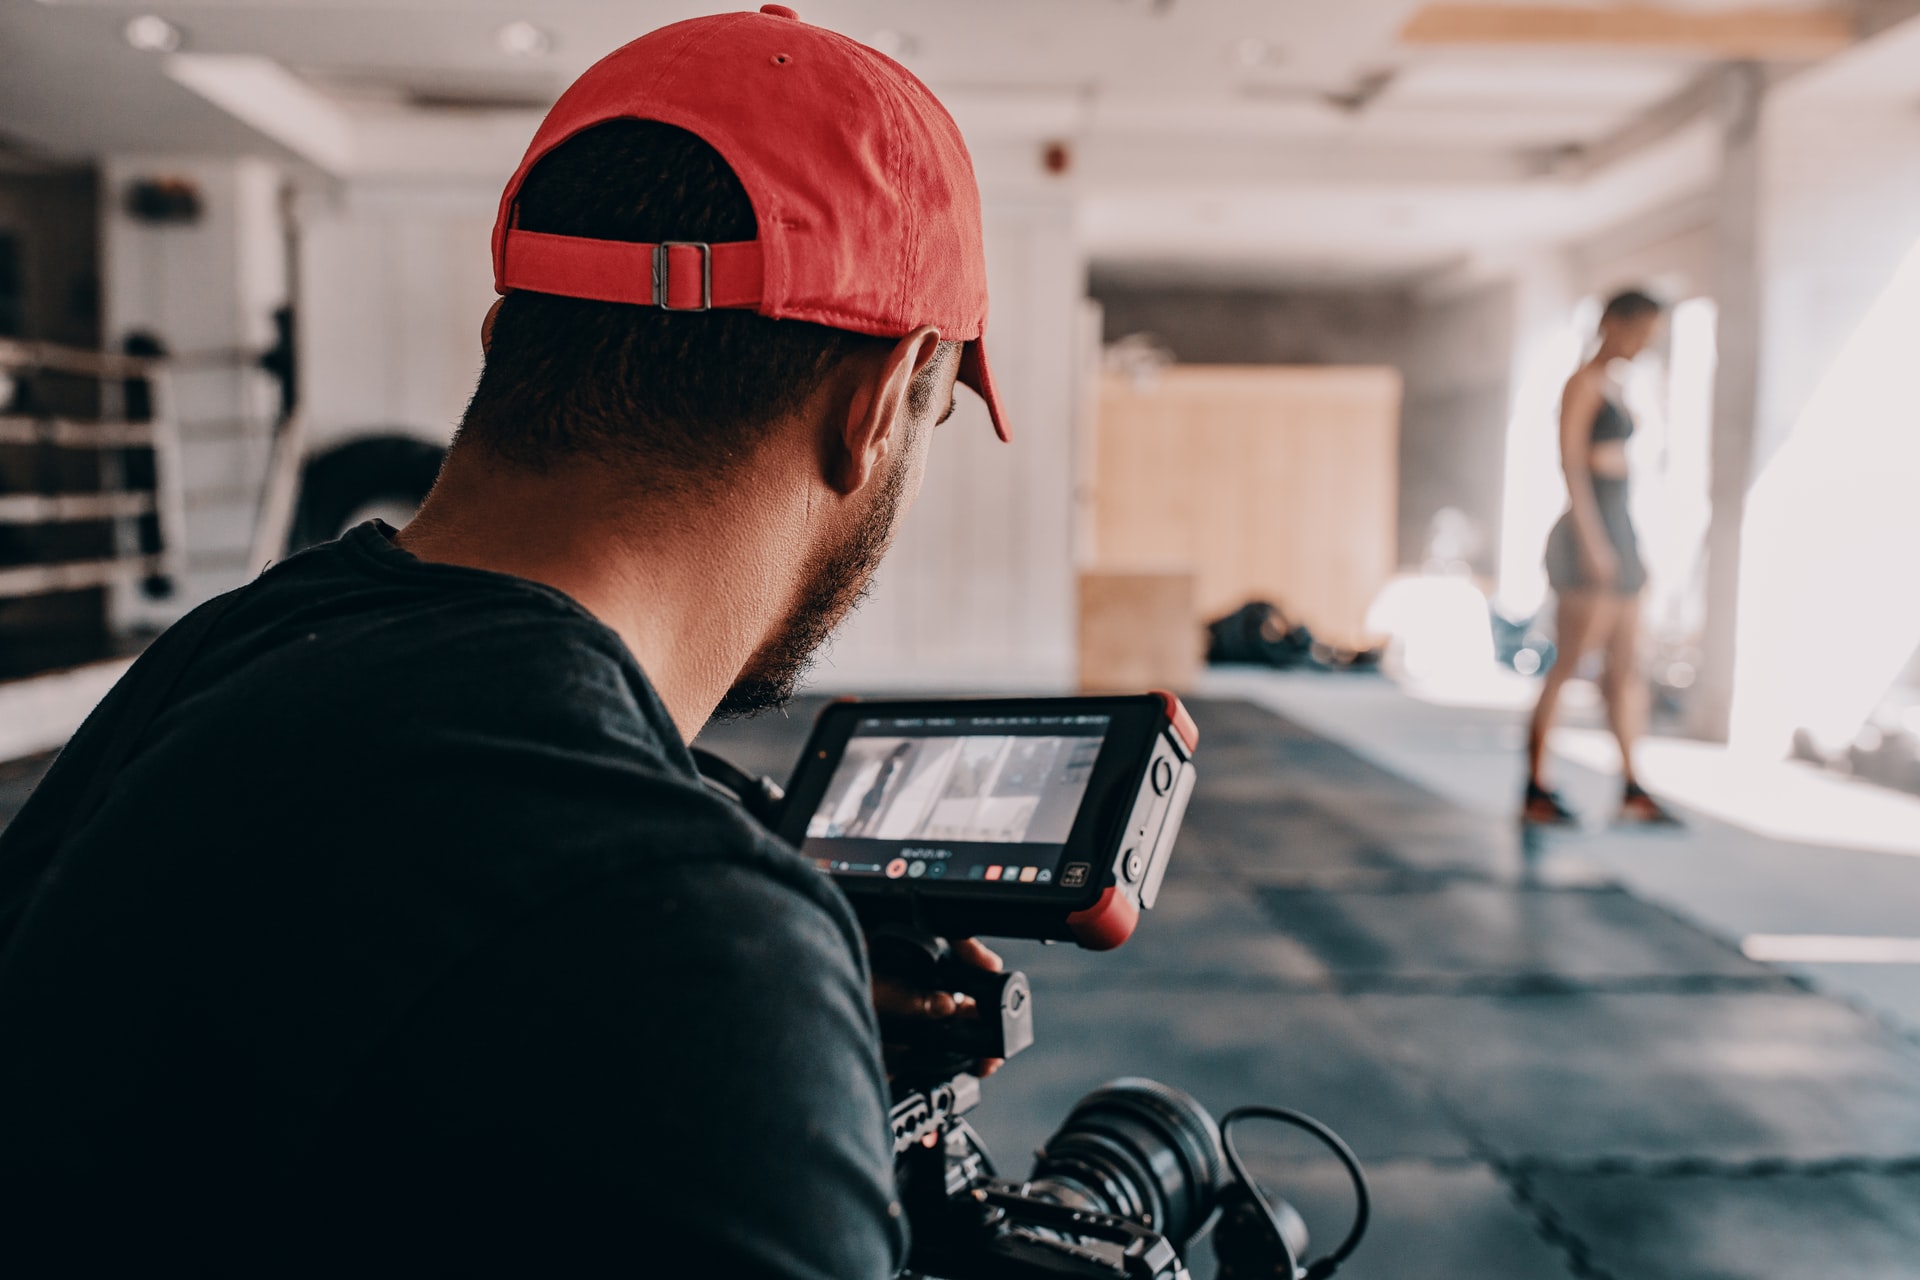 Filming a MMA fighter.